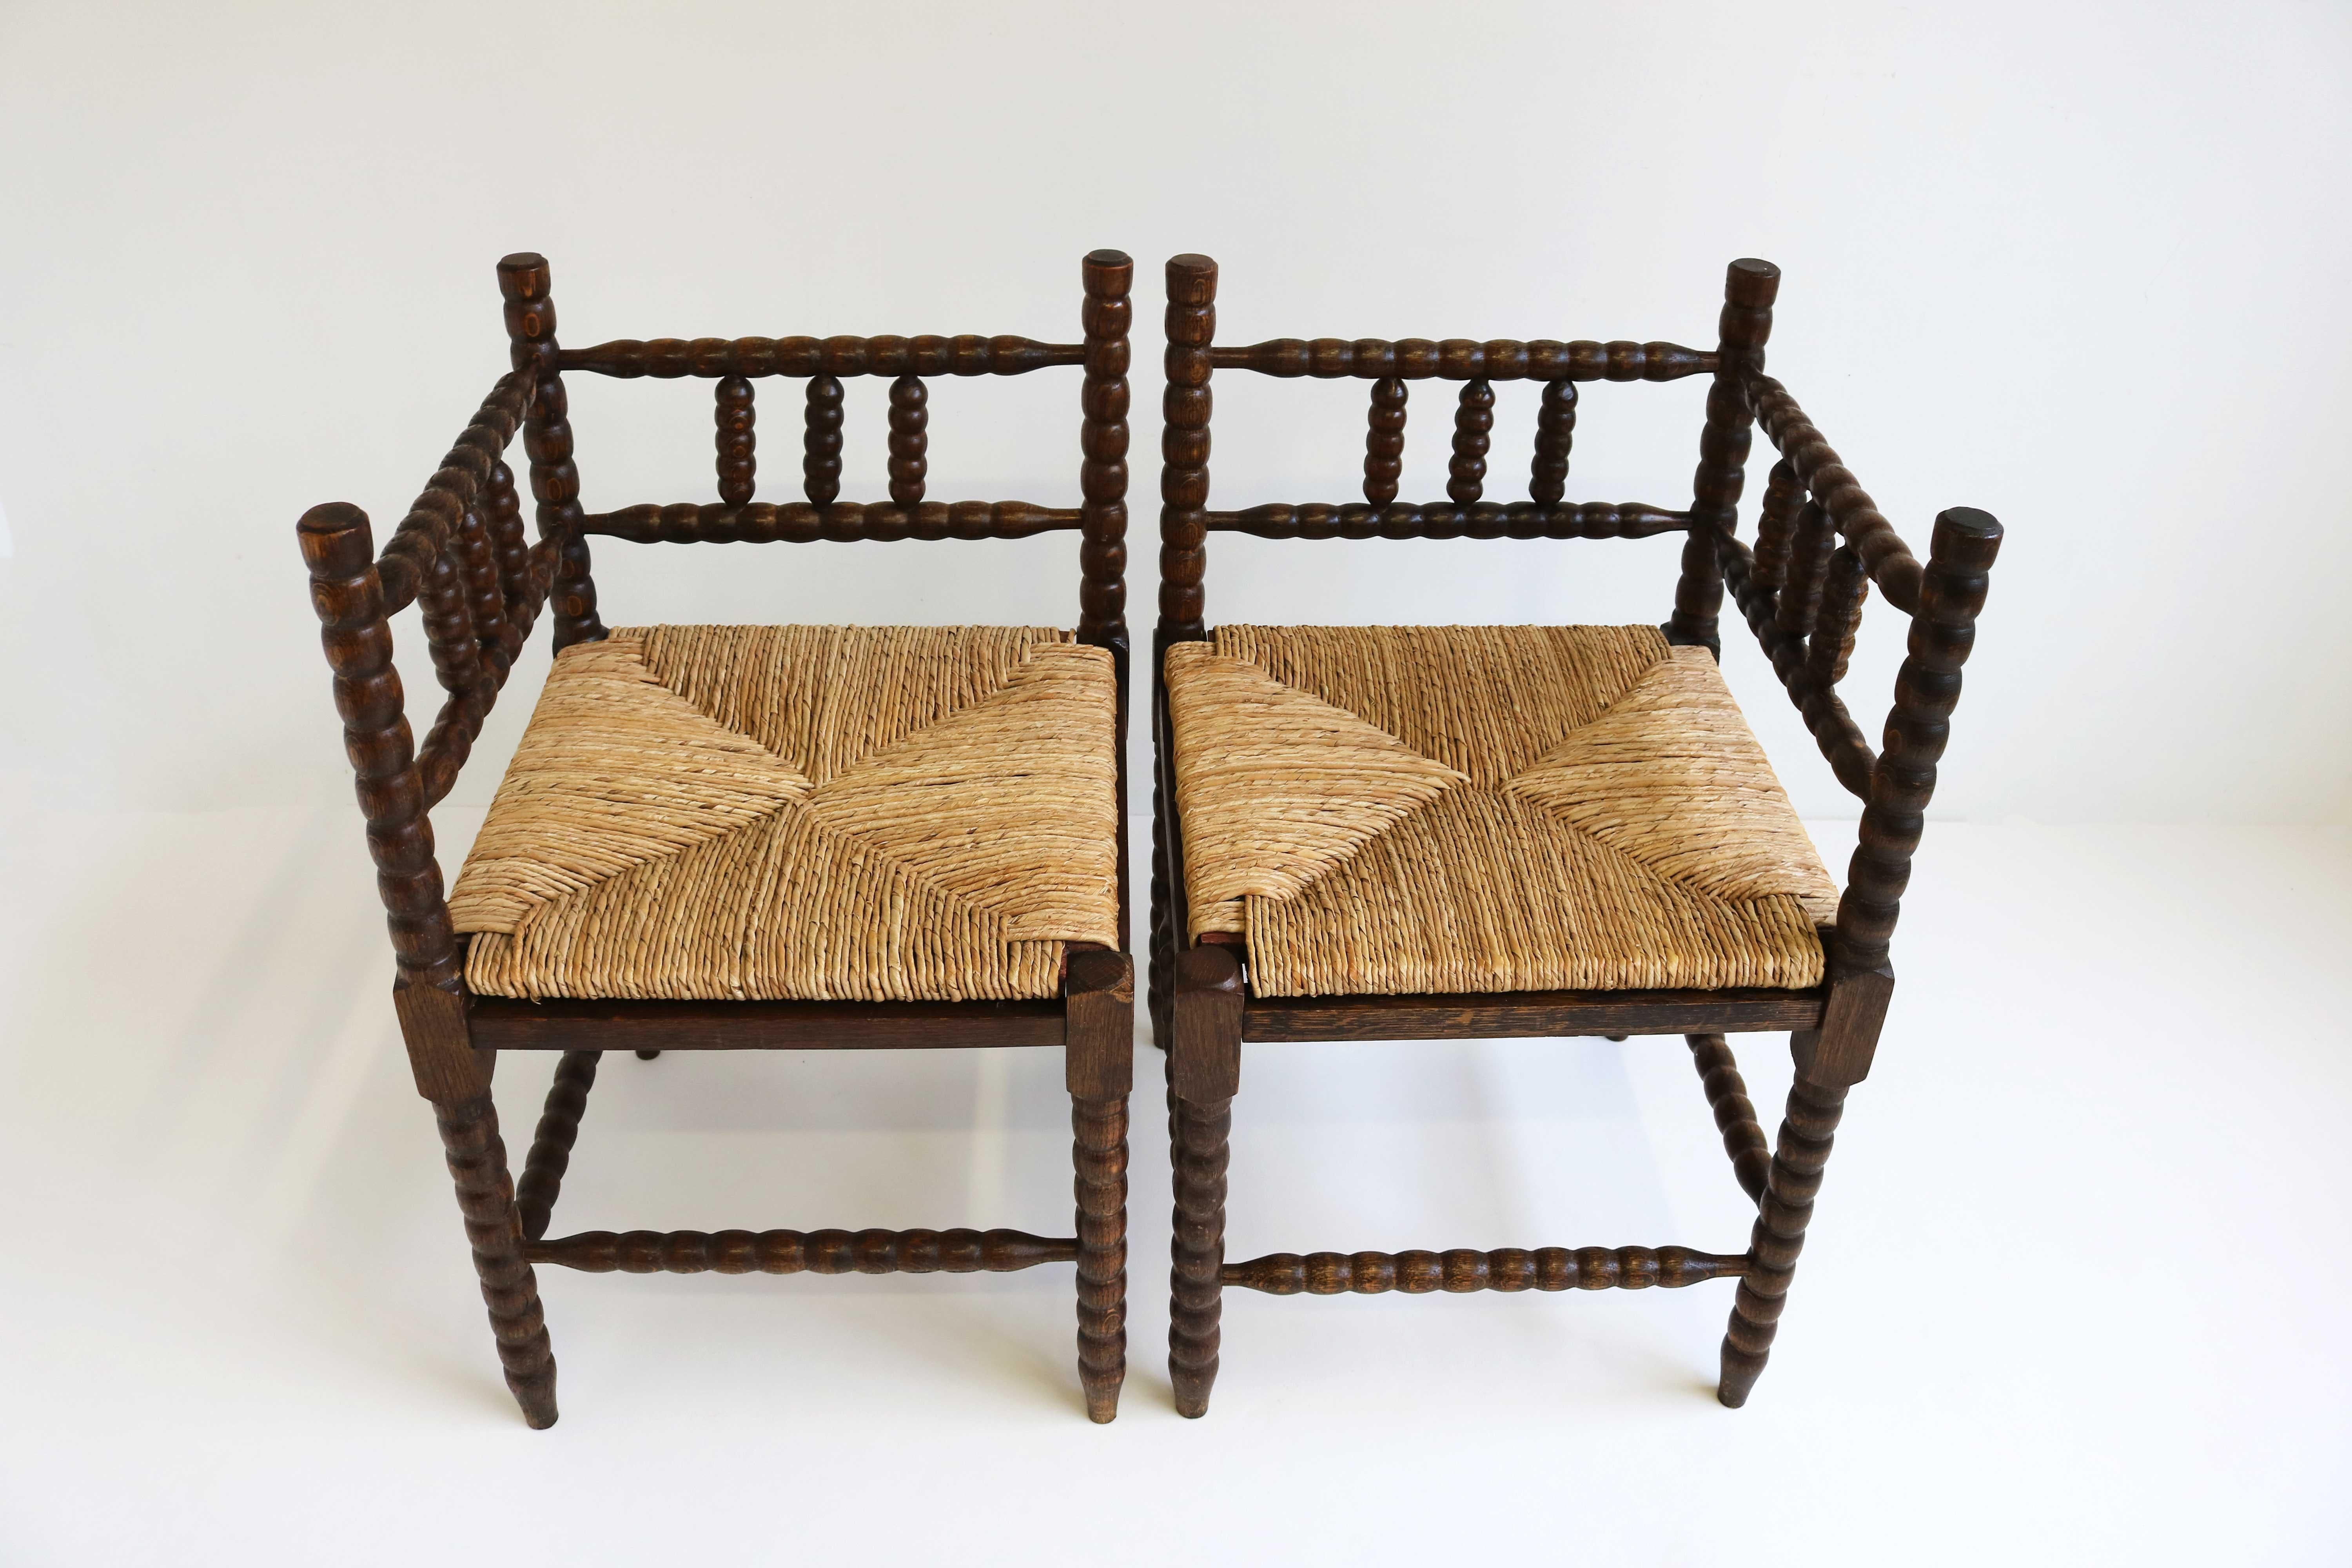 Pair Antique Dutch Rush- Seat  Bobbin Corner Chairs , Turned Wood Side Chairs and Cane 1900s, Country Living, Farmhouse Decor.

Beautiful couple Dutch bobbin corner chairs , from the 1900s. 
This antique 'corner chair' with wicker seat is originally